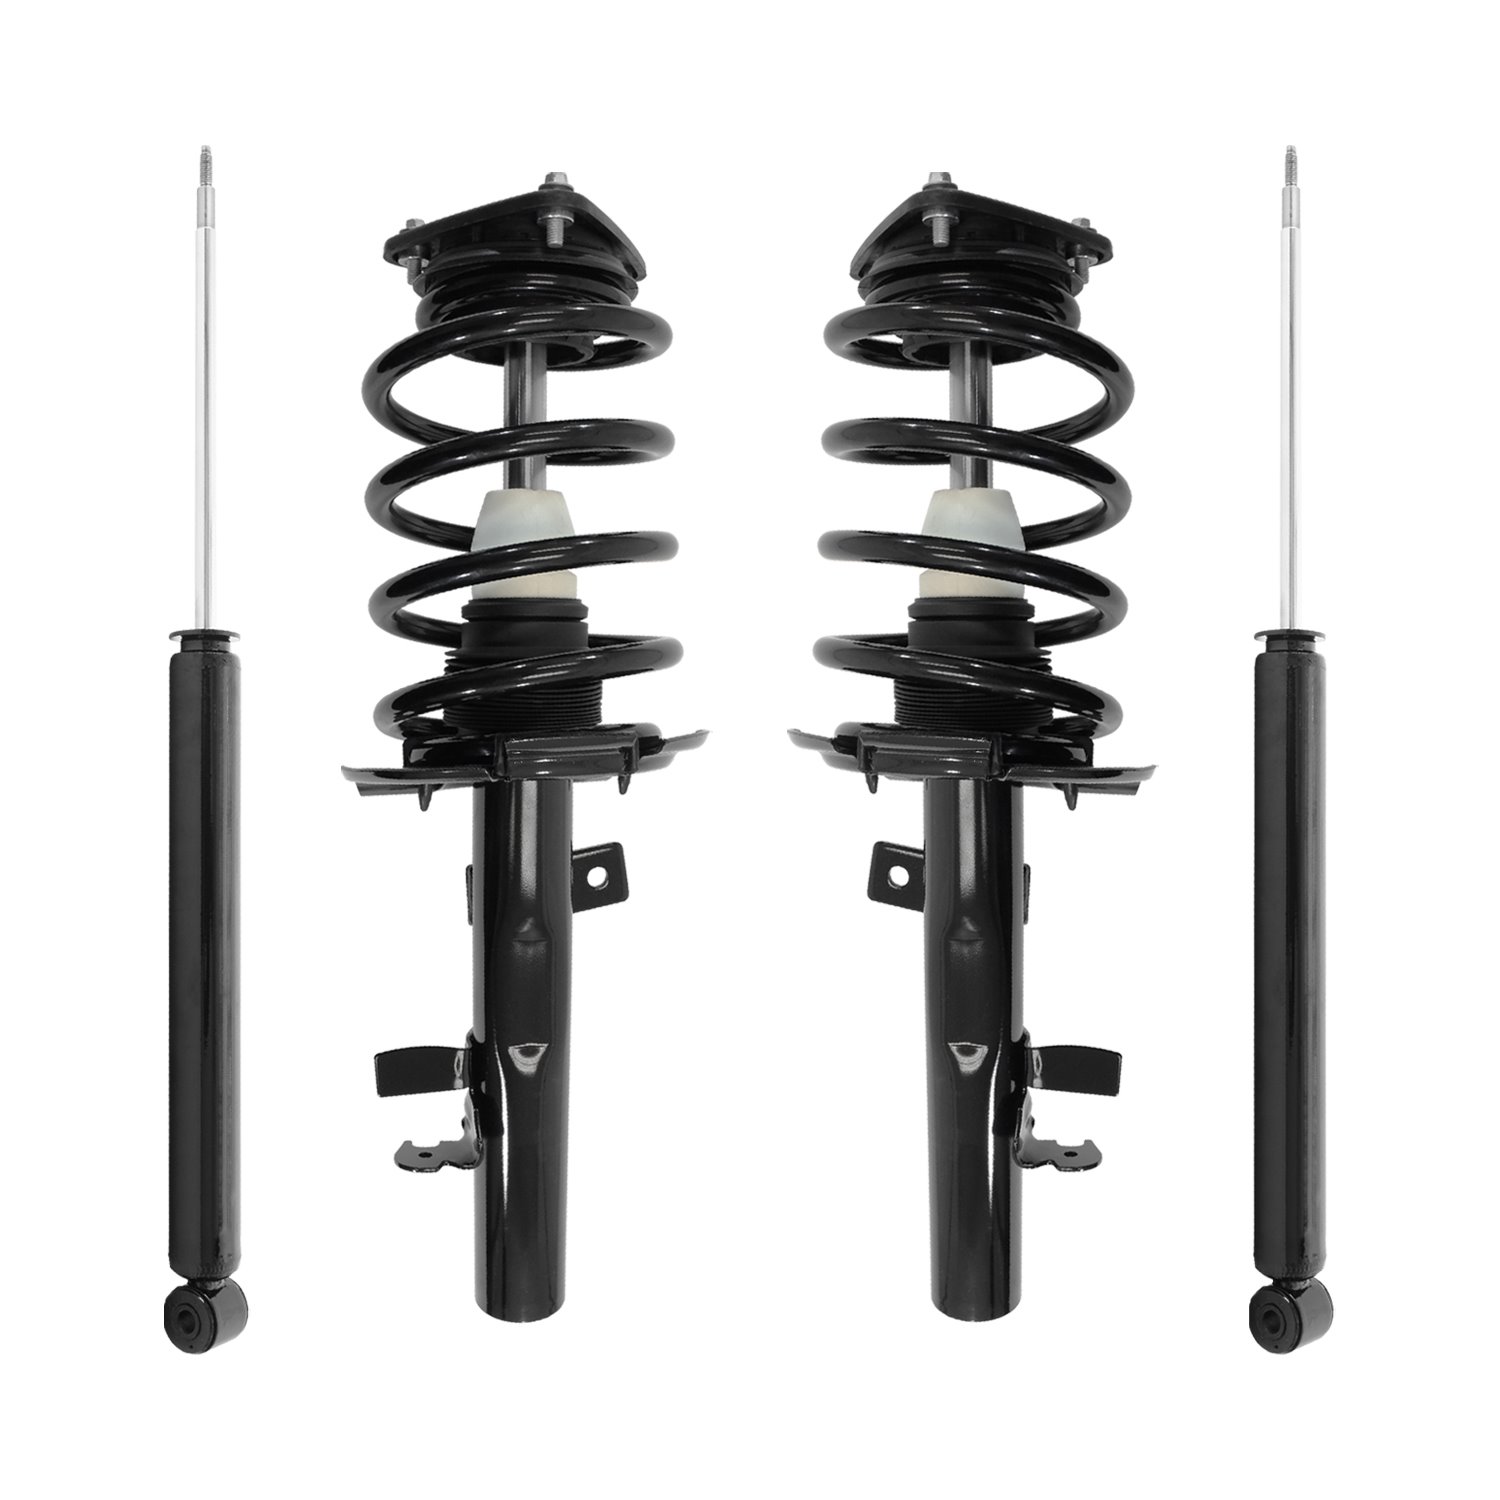 4-13311-252420-001 Front & Rear Suspension Strut & Coil Spring Assembly Fits Select Lincoln MKC